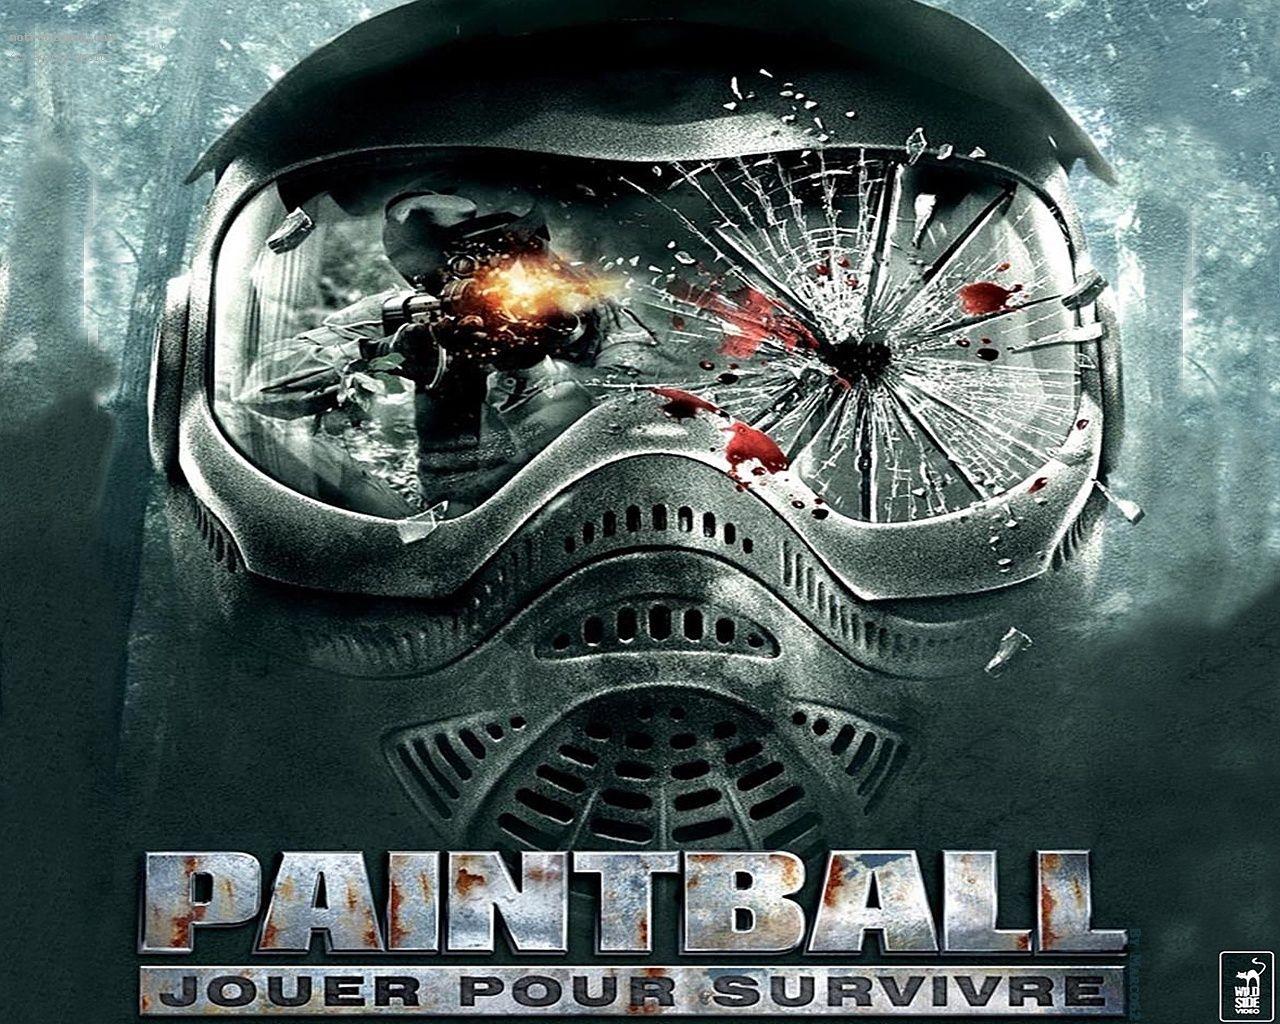 New Paintball Wallpaper for Mobile devices and Deskx1024